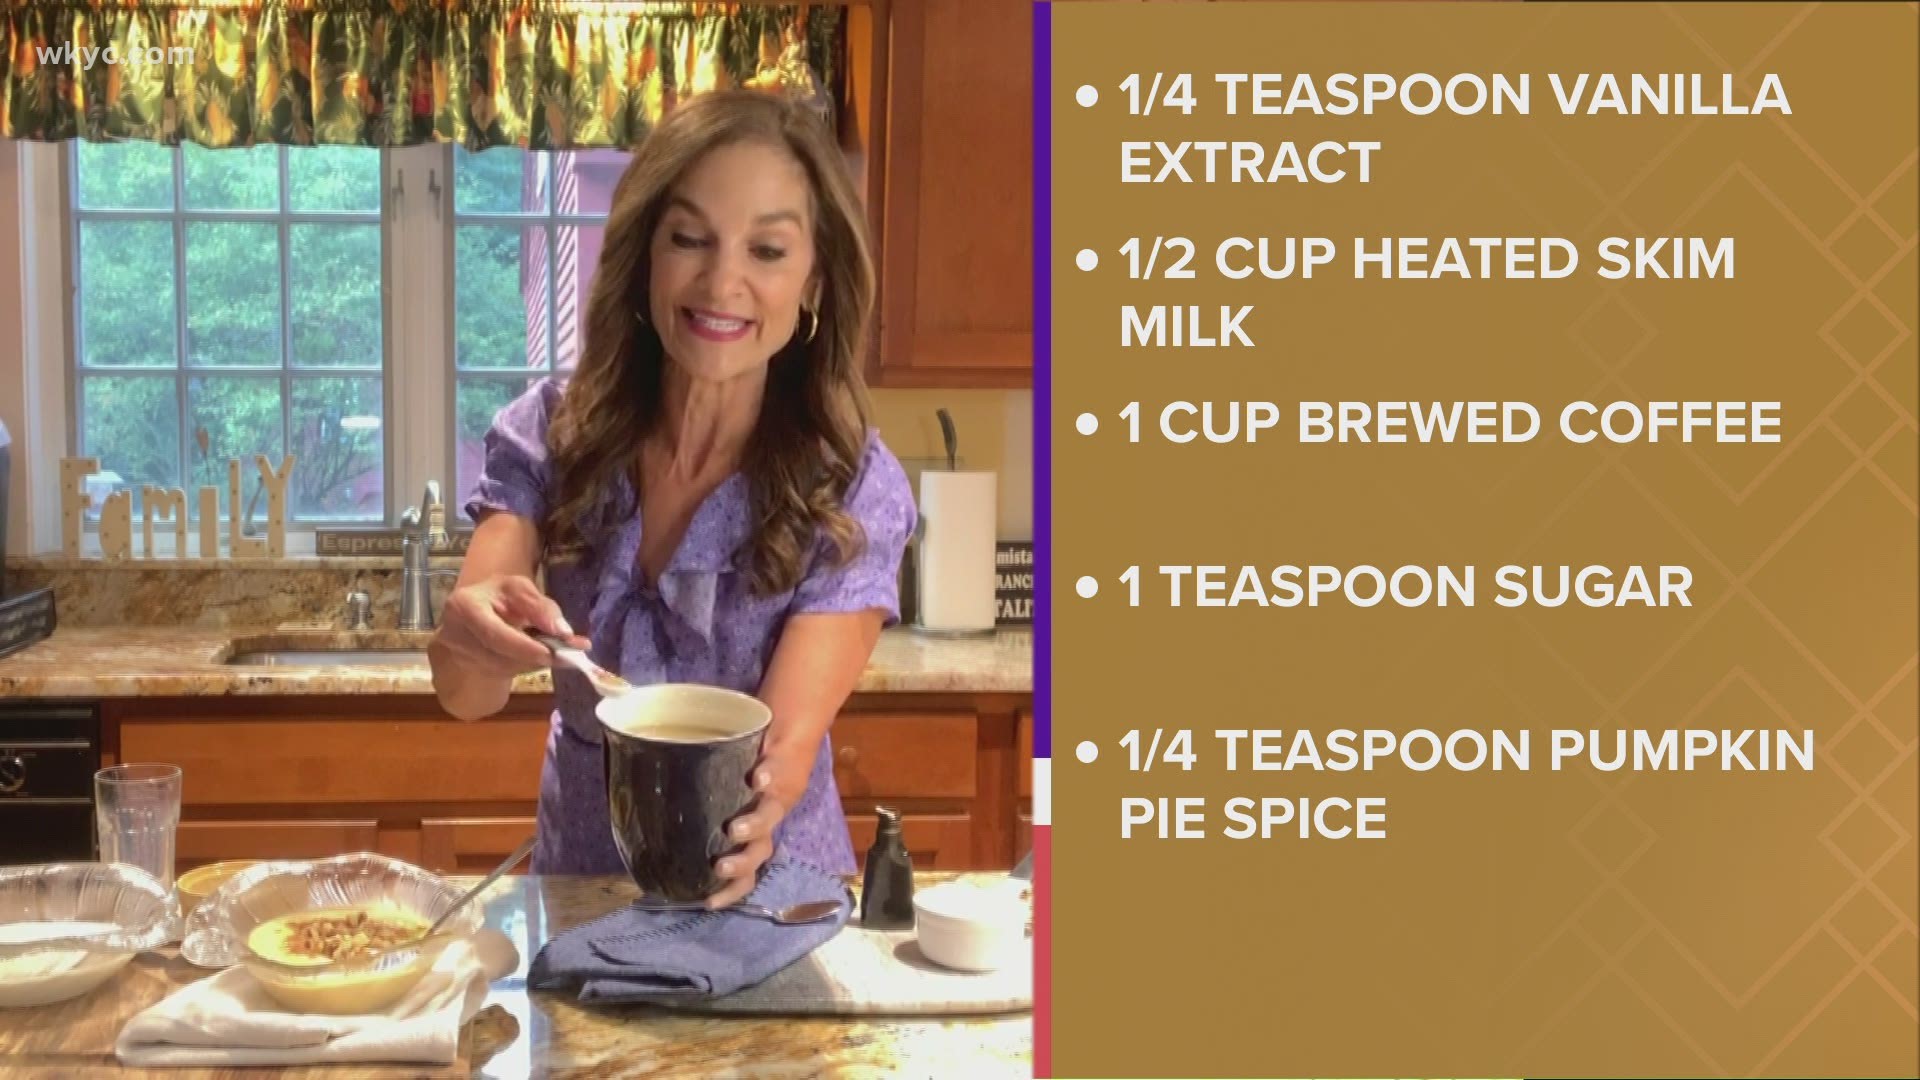 Spending too much on your favorite Pumpkin Spice drink? Joy Bauer is here to give you tips on a healthy drink at home